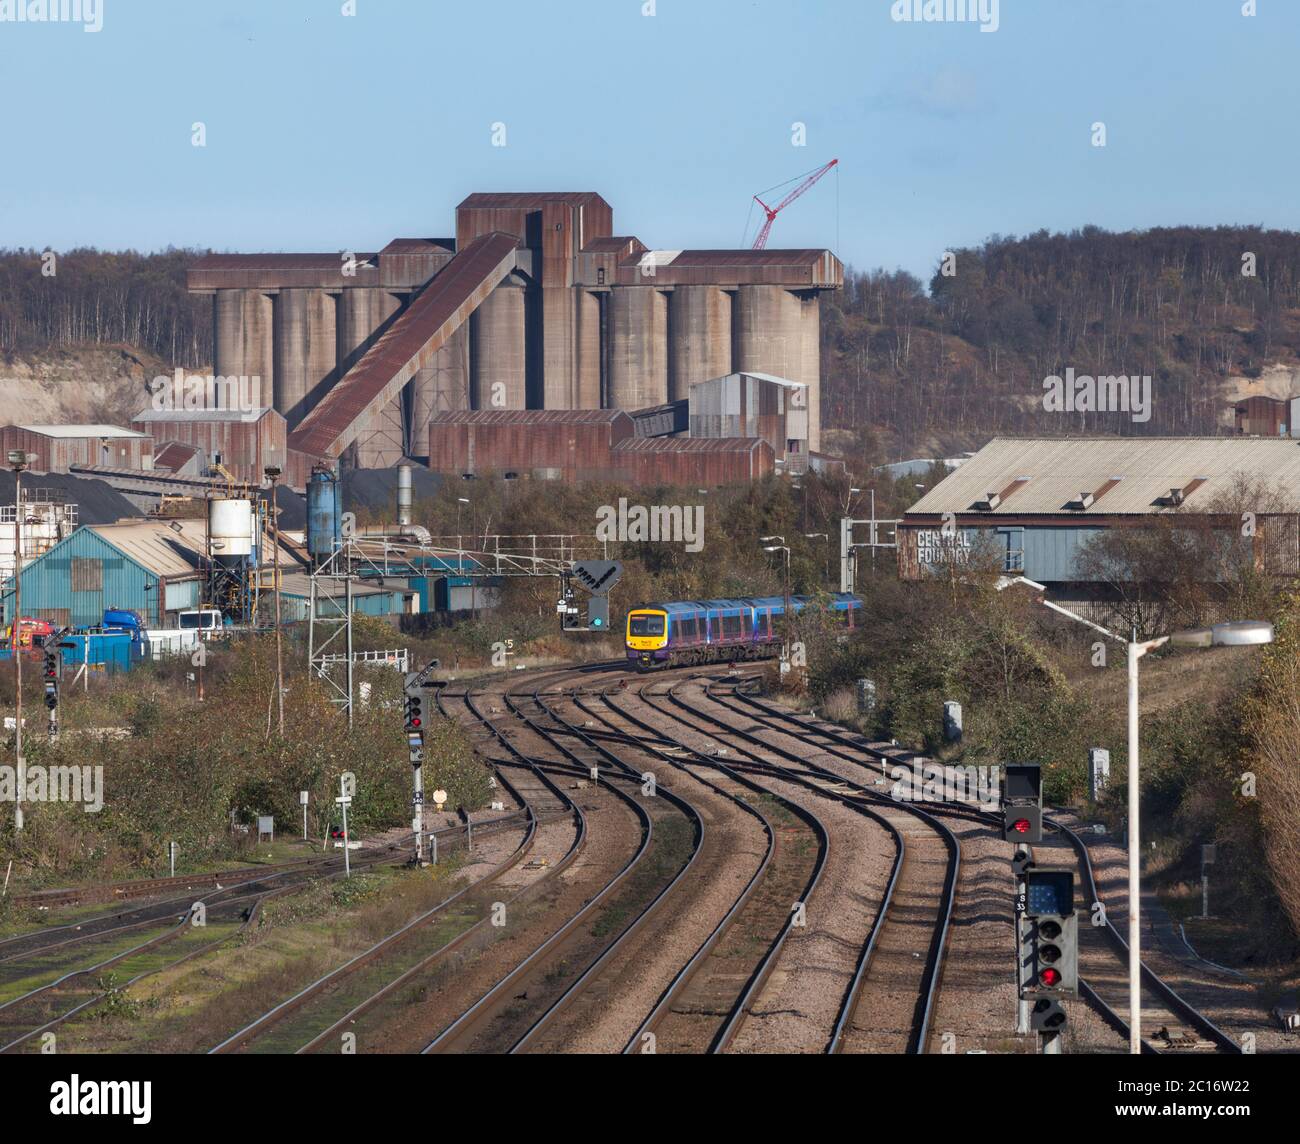 First Transpennine Express class 170 Bombardier Turbostar train passing through Scunthorpe steelworks Stock Photo